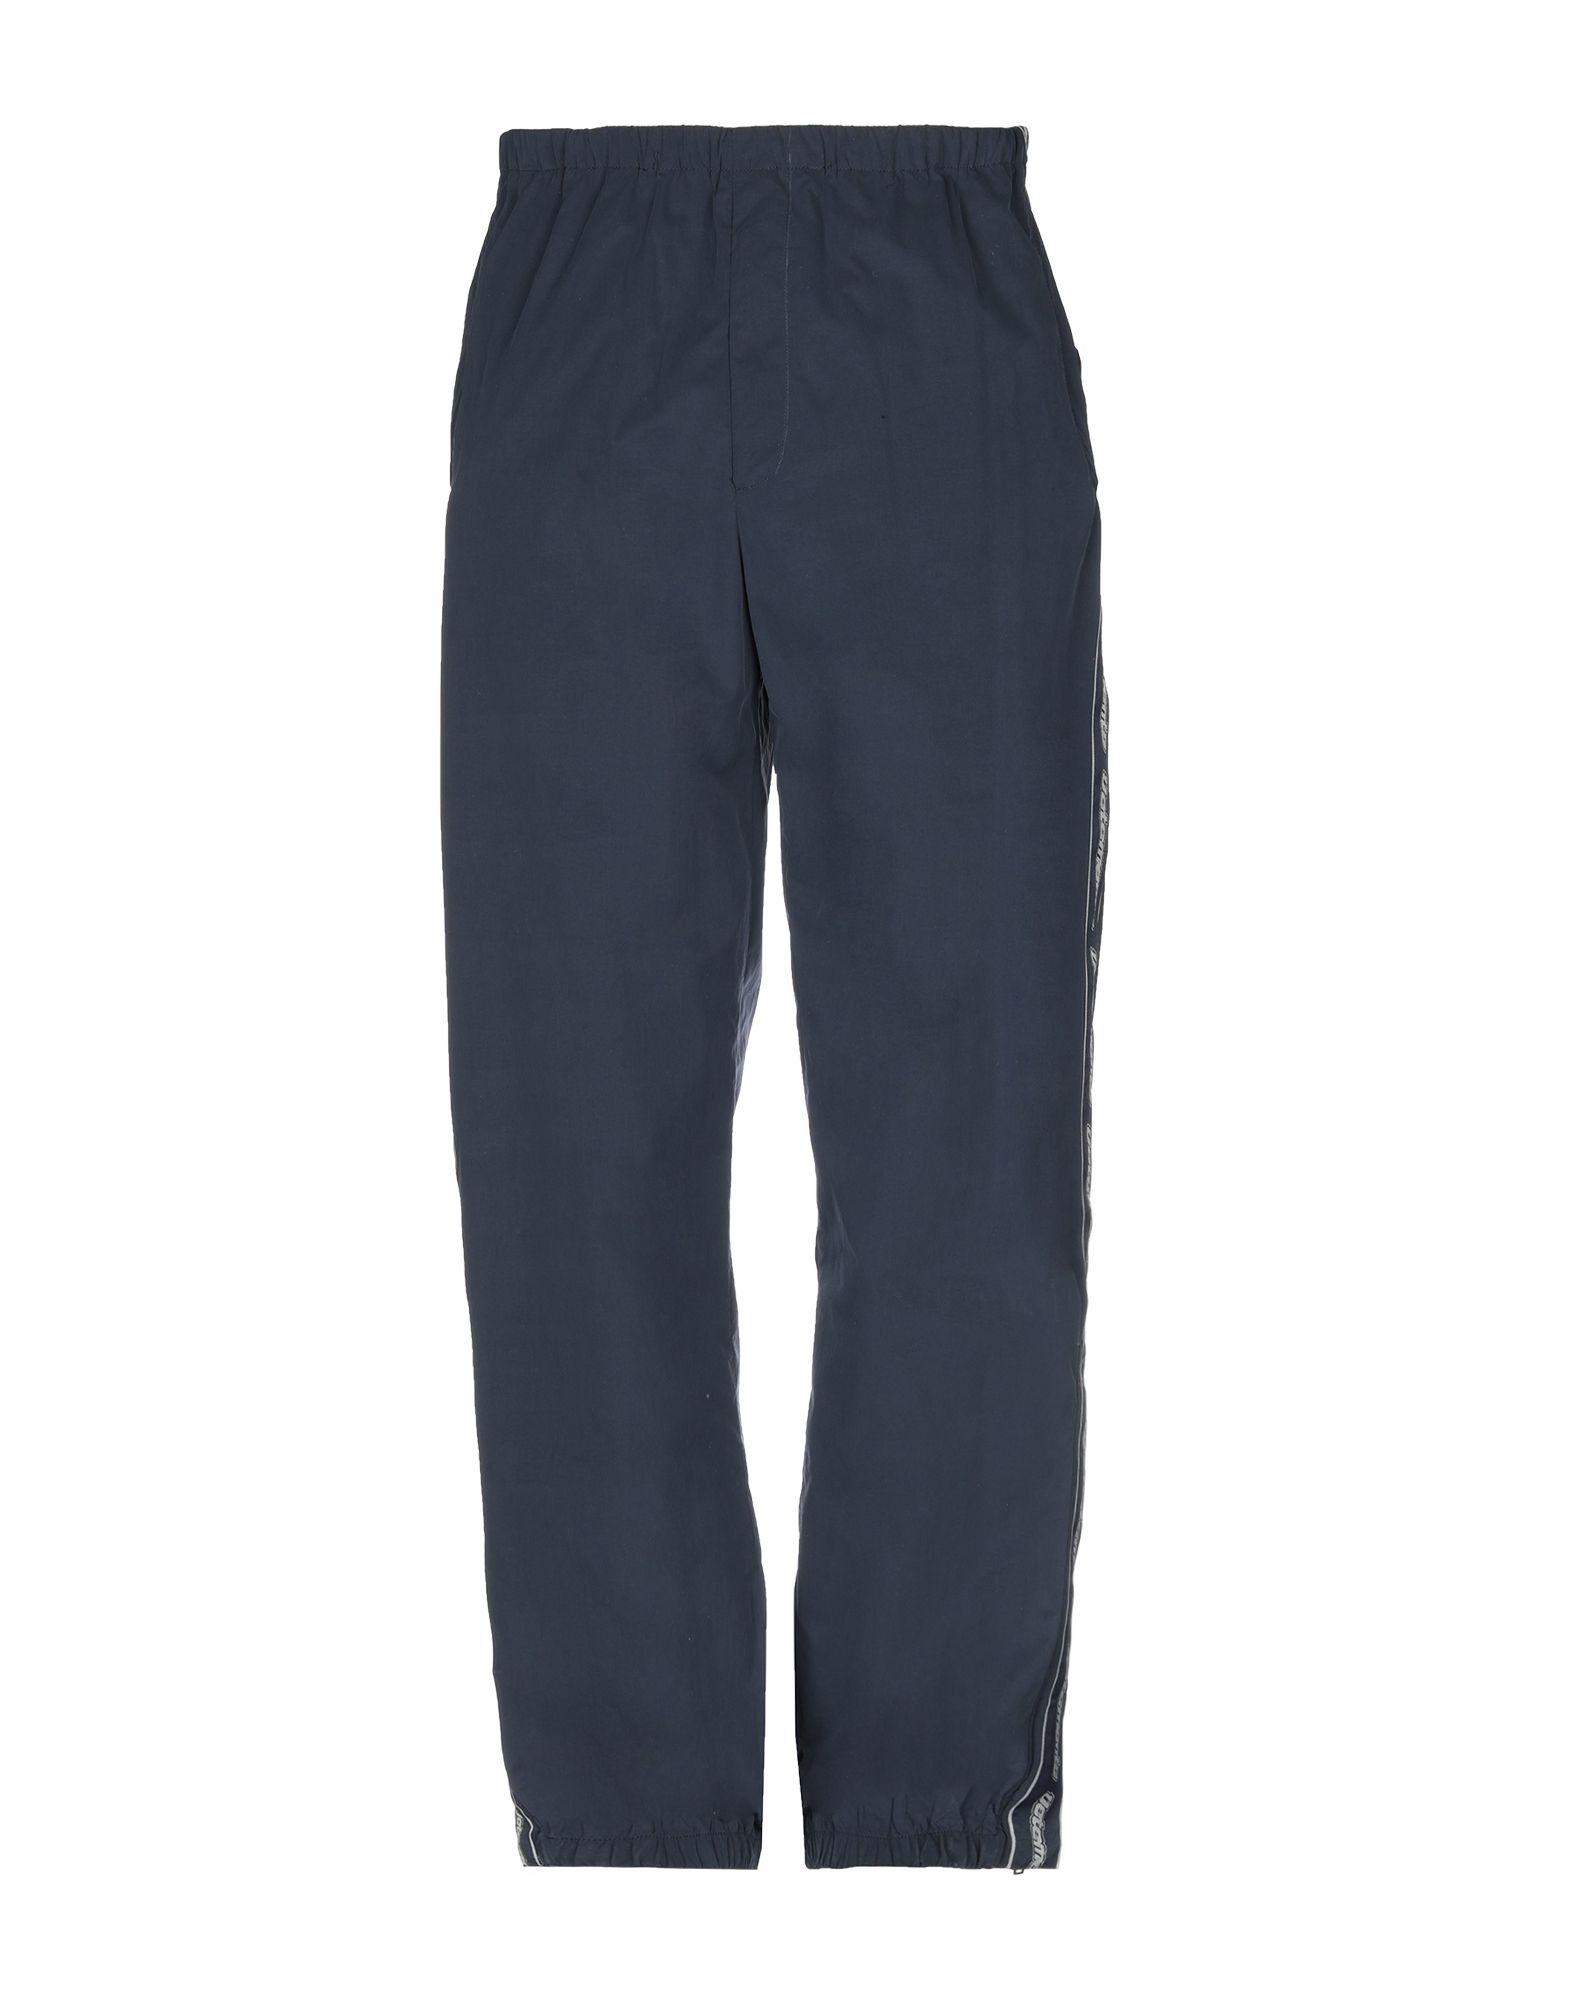 Vetements Synthetic Casual Pants in Slate Blue (Blue) for Men - Lyst